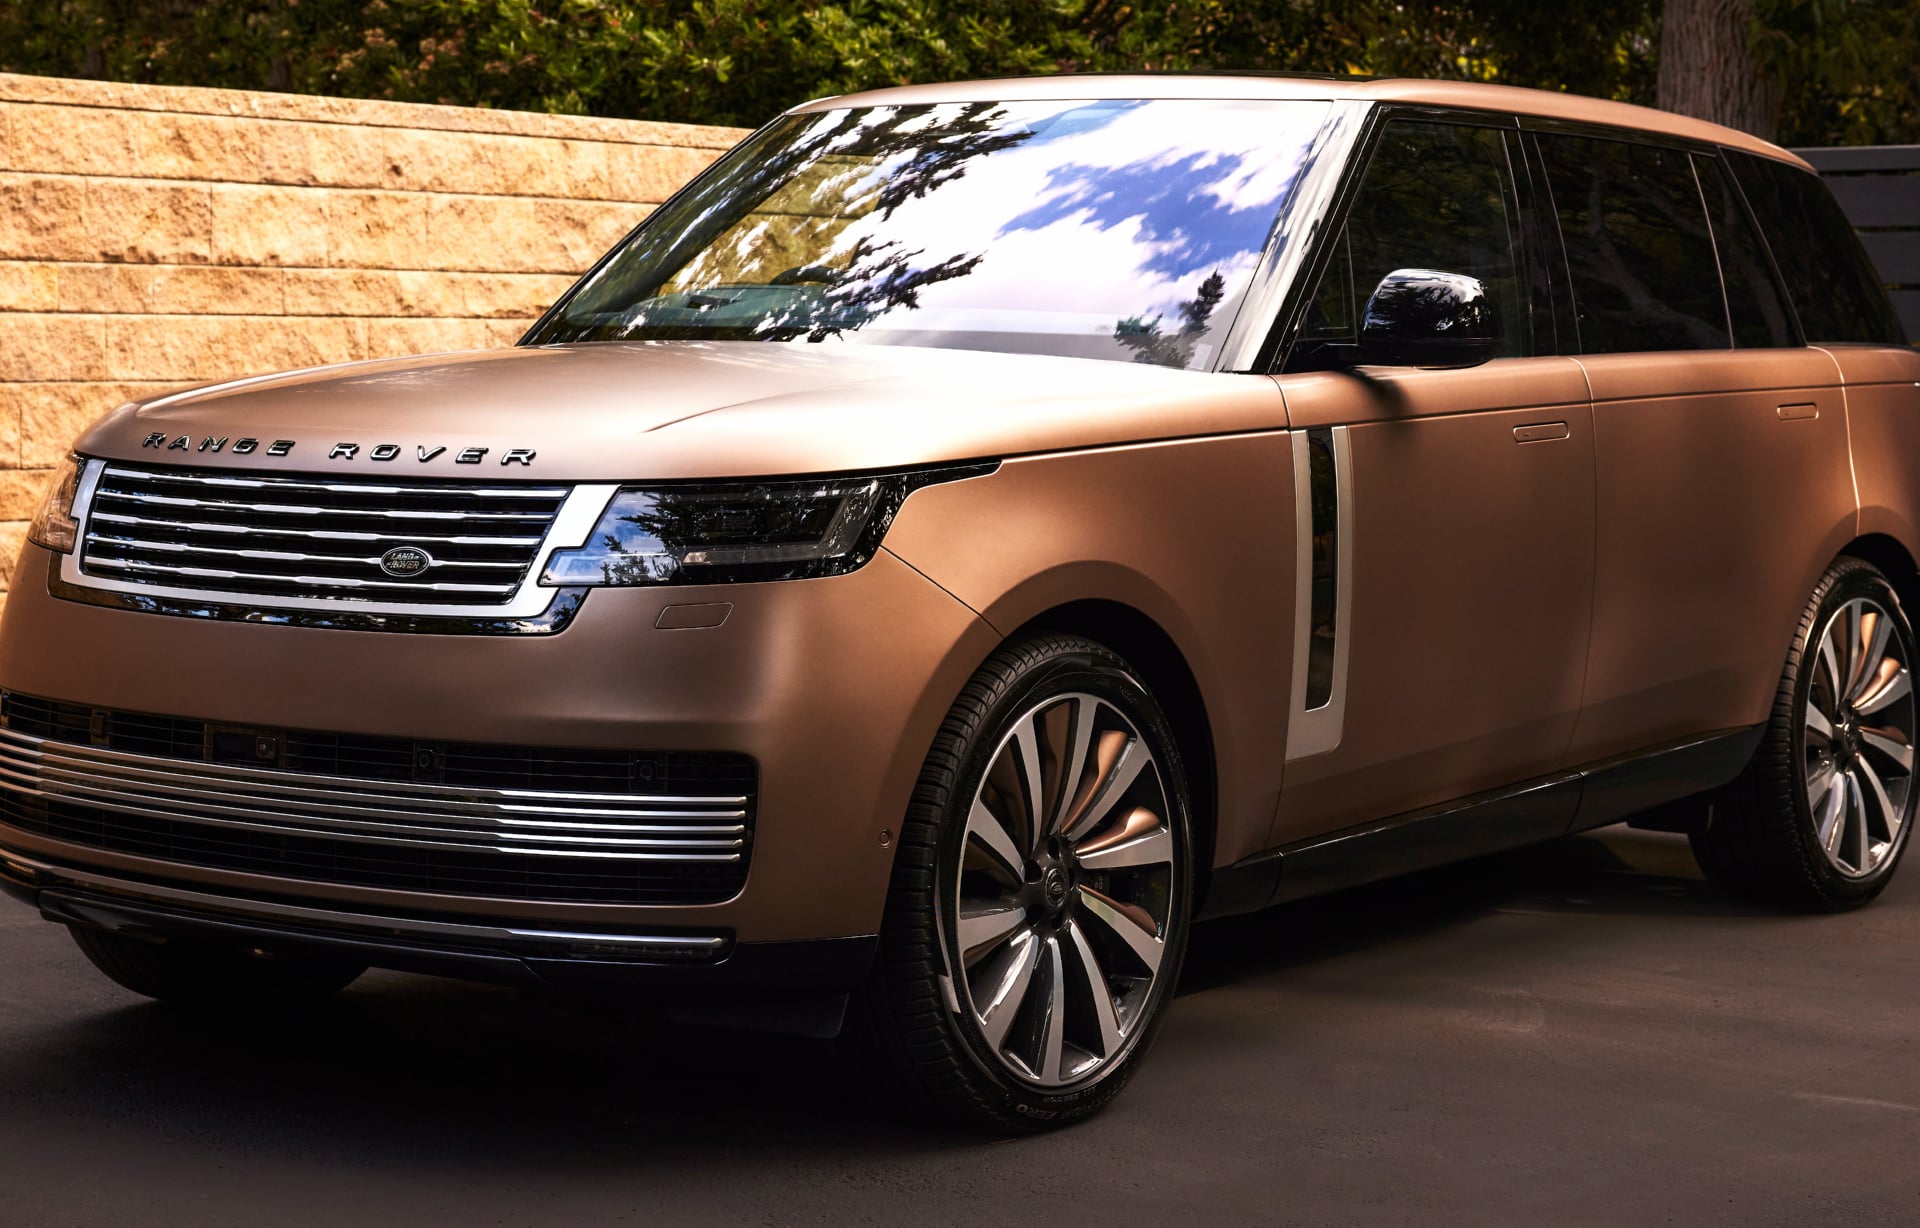 Range Rover SV Carmel Edition wallpapers HD quality